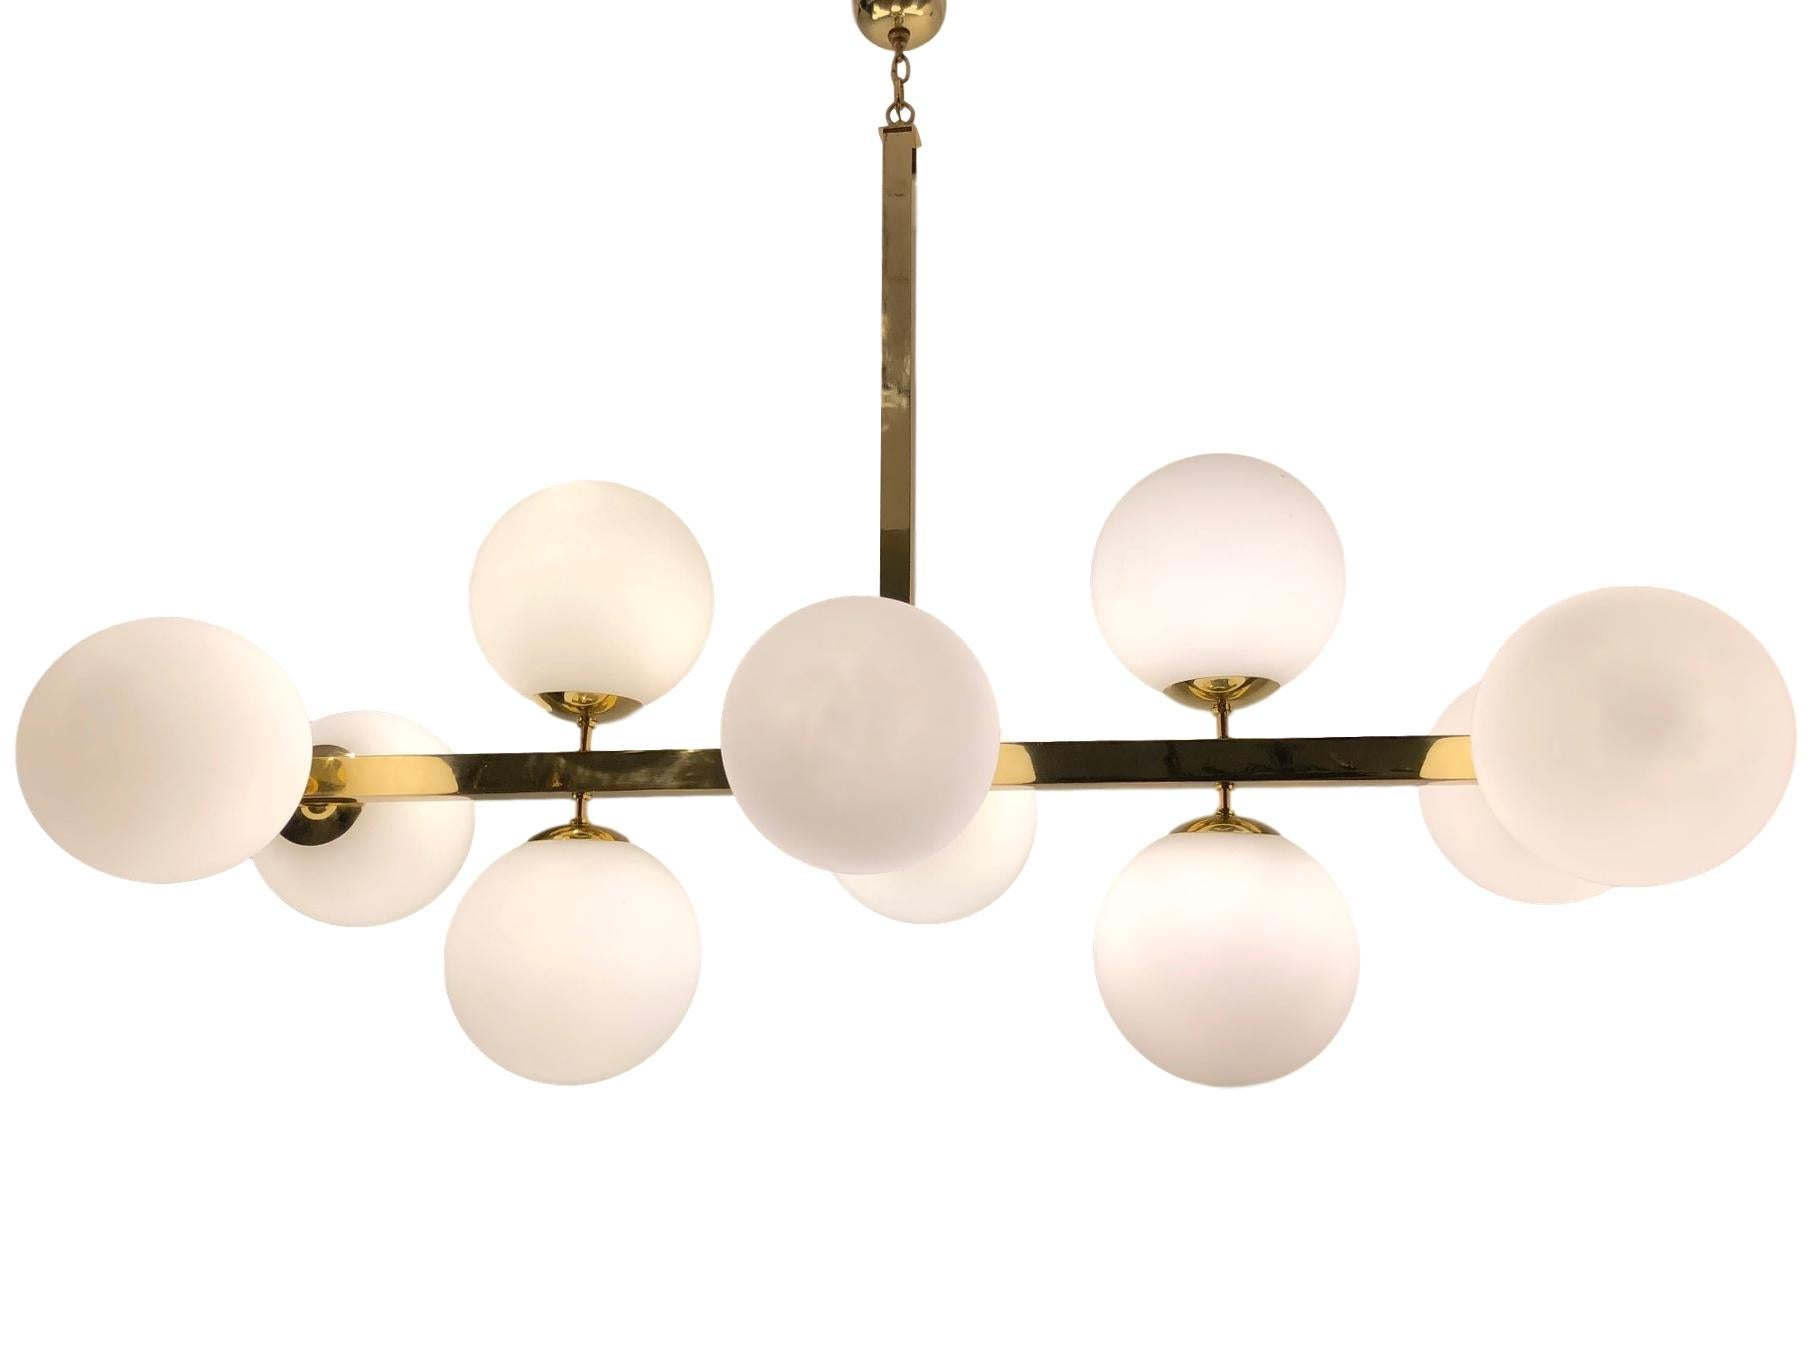 A large circa 1960s Italian moderne horizontal light fixture with polished bronze finish and ten over-sized globe lights.

Measurements:
Minimum drop 36